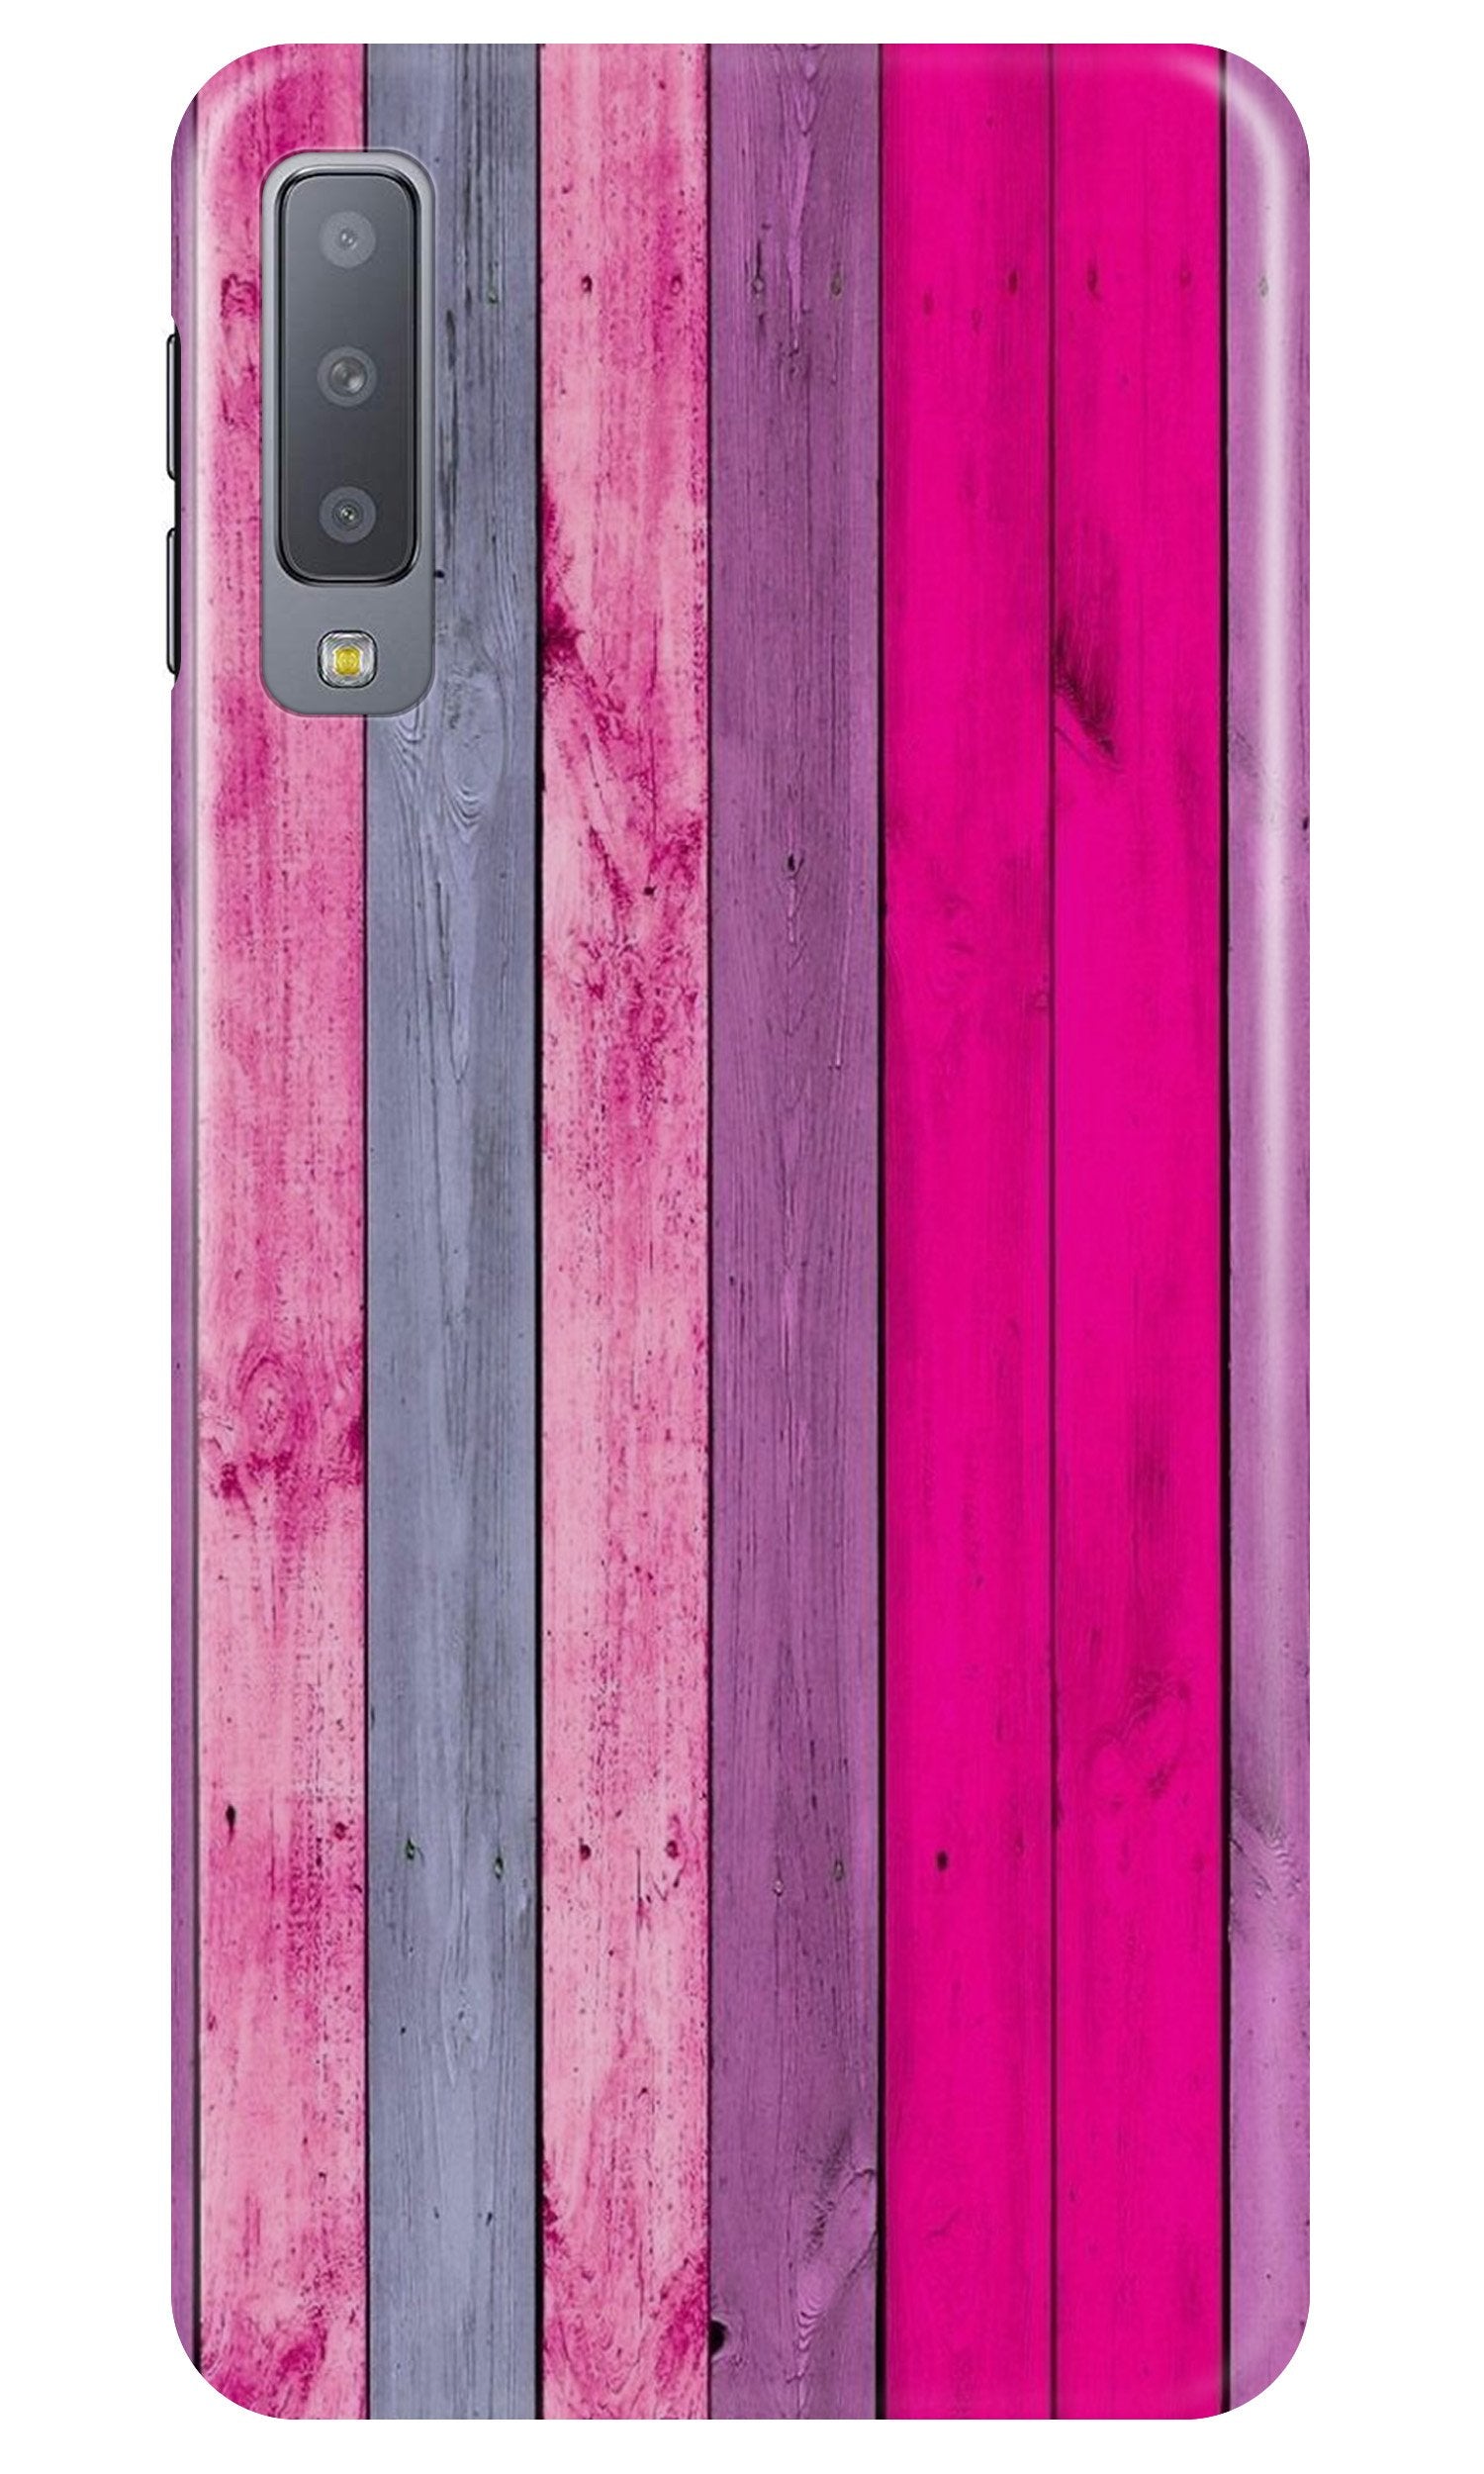 Wooden look Case for Samsung Galaxy A70